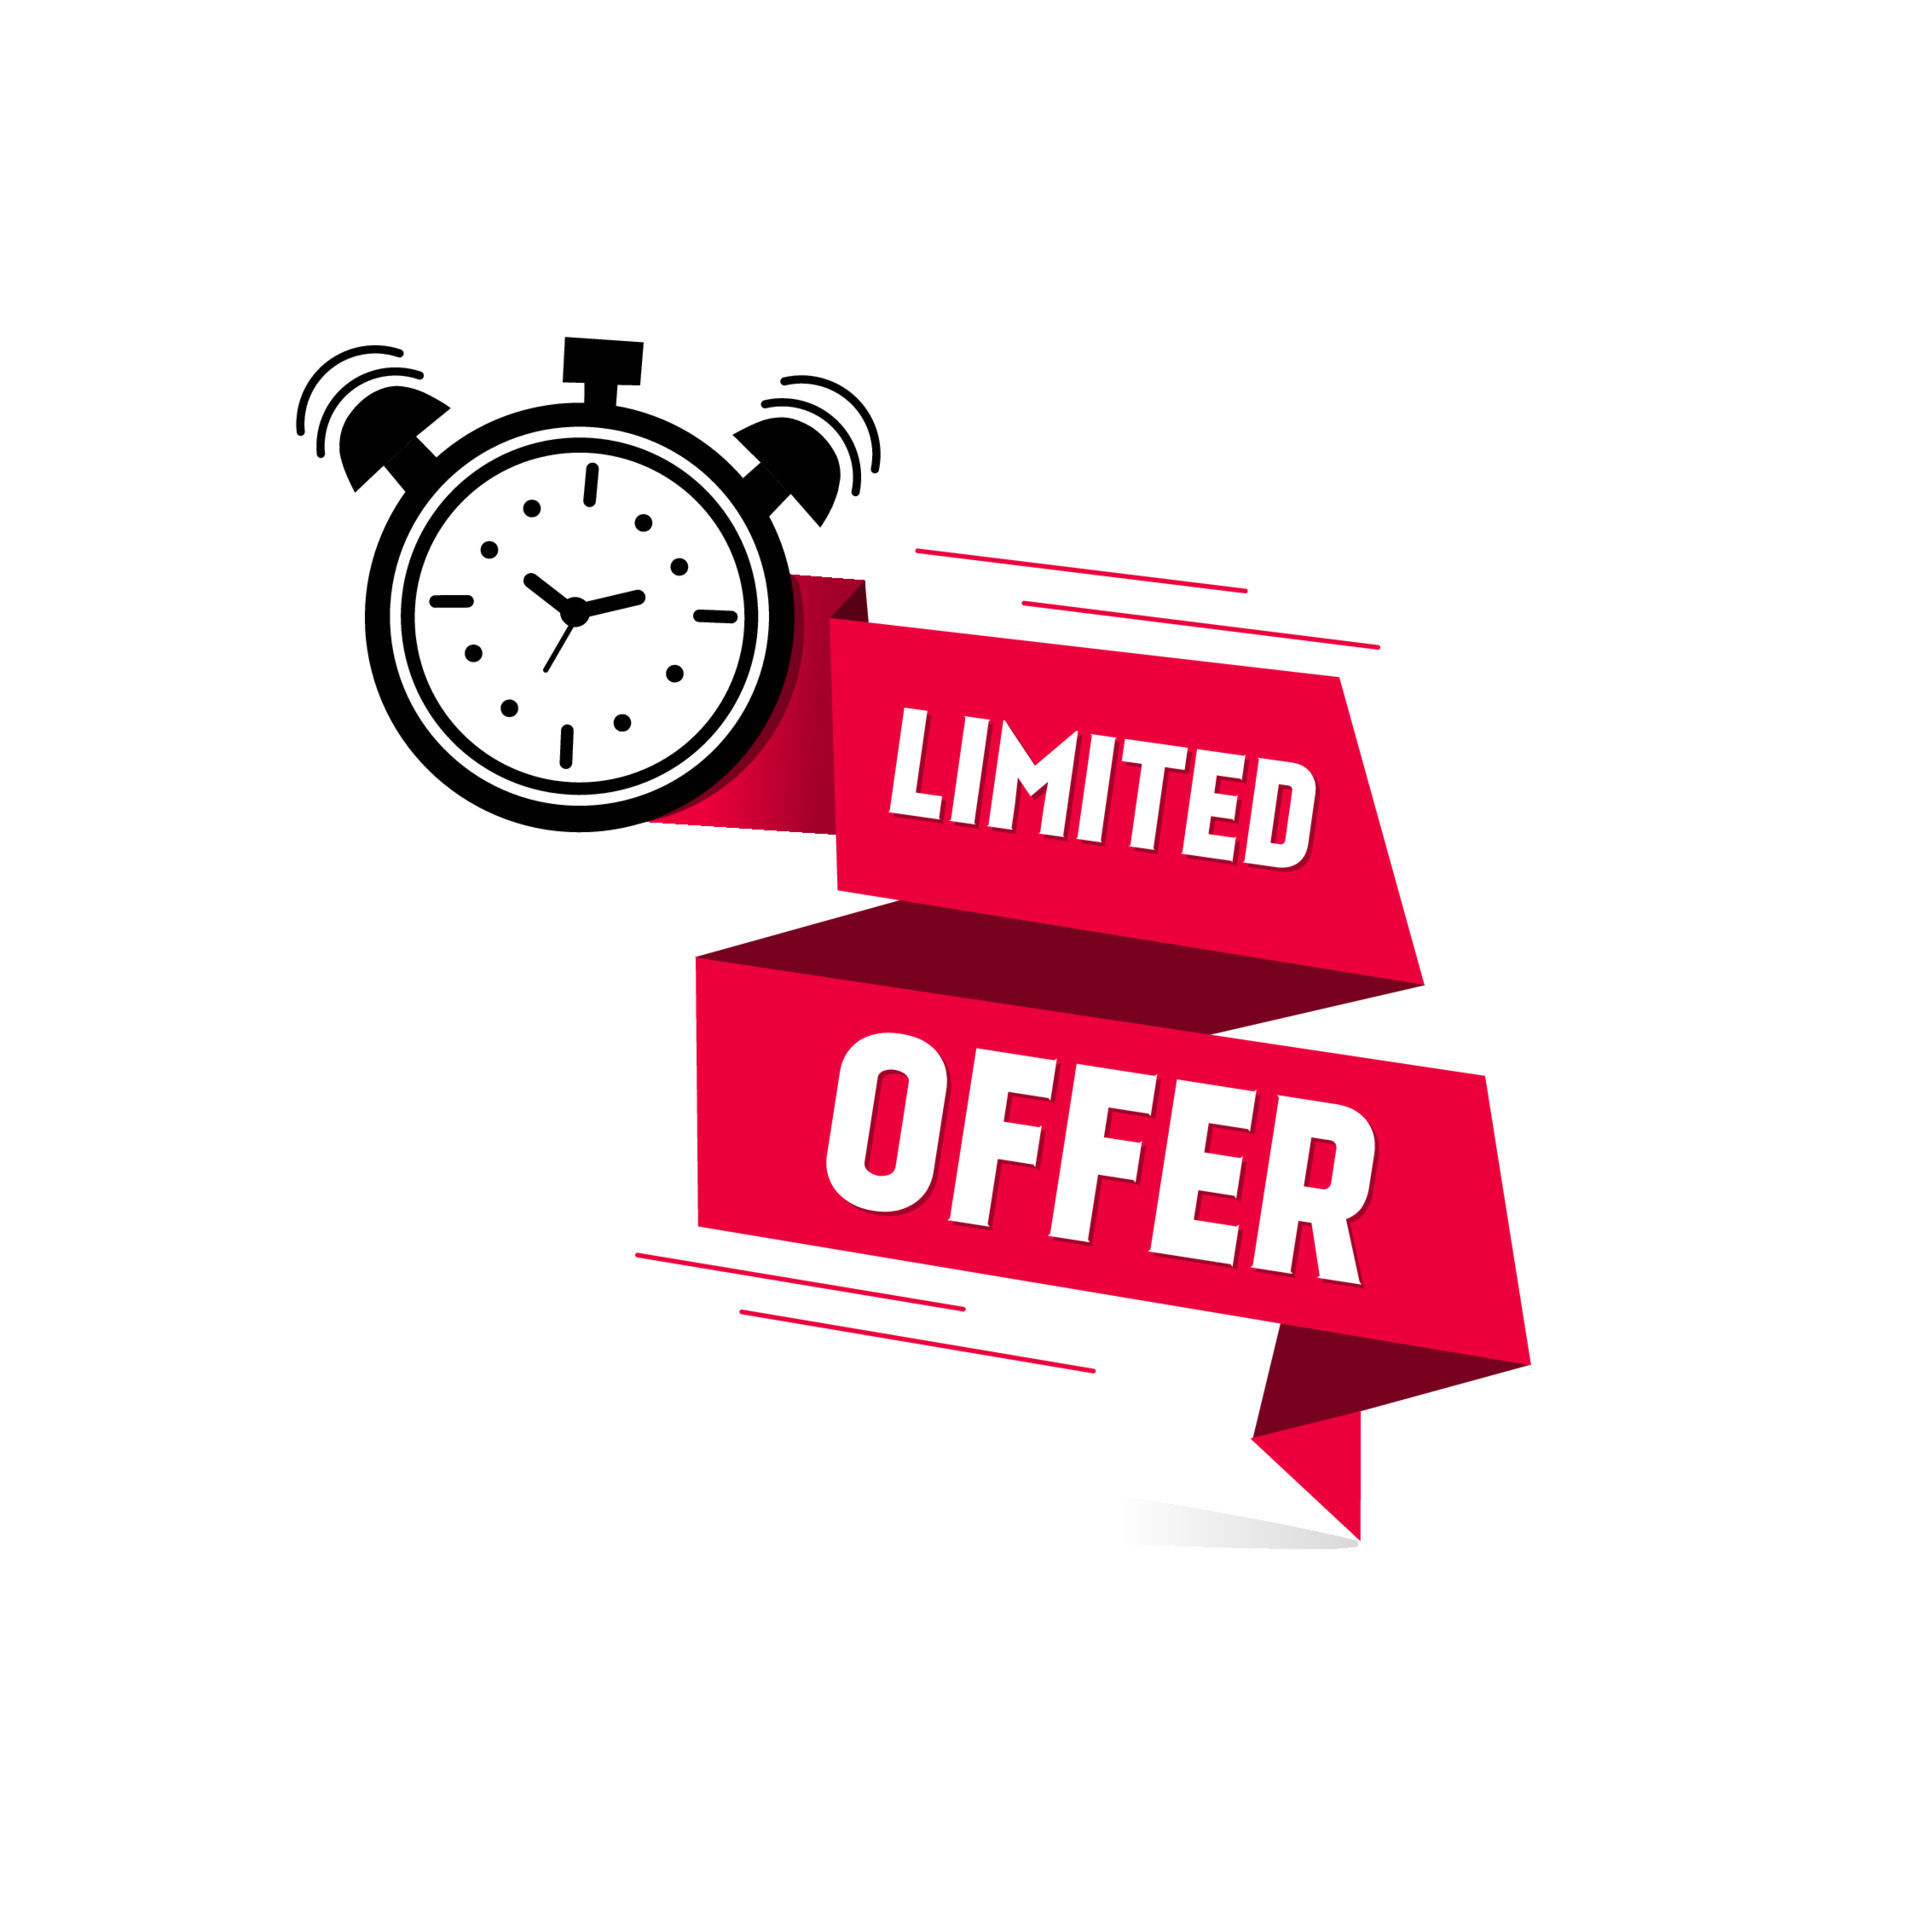 Limited offer icon with time countdown. Last minute limited offer with  clock for sale promo, logo or banner or red background. Label countdown of  time for offer sale or exclusive deal design.